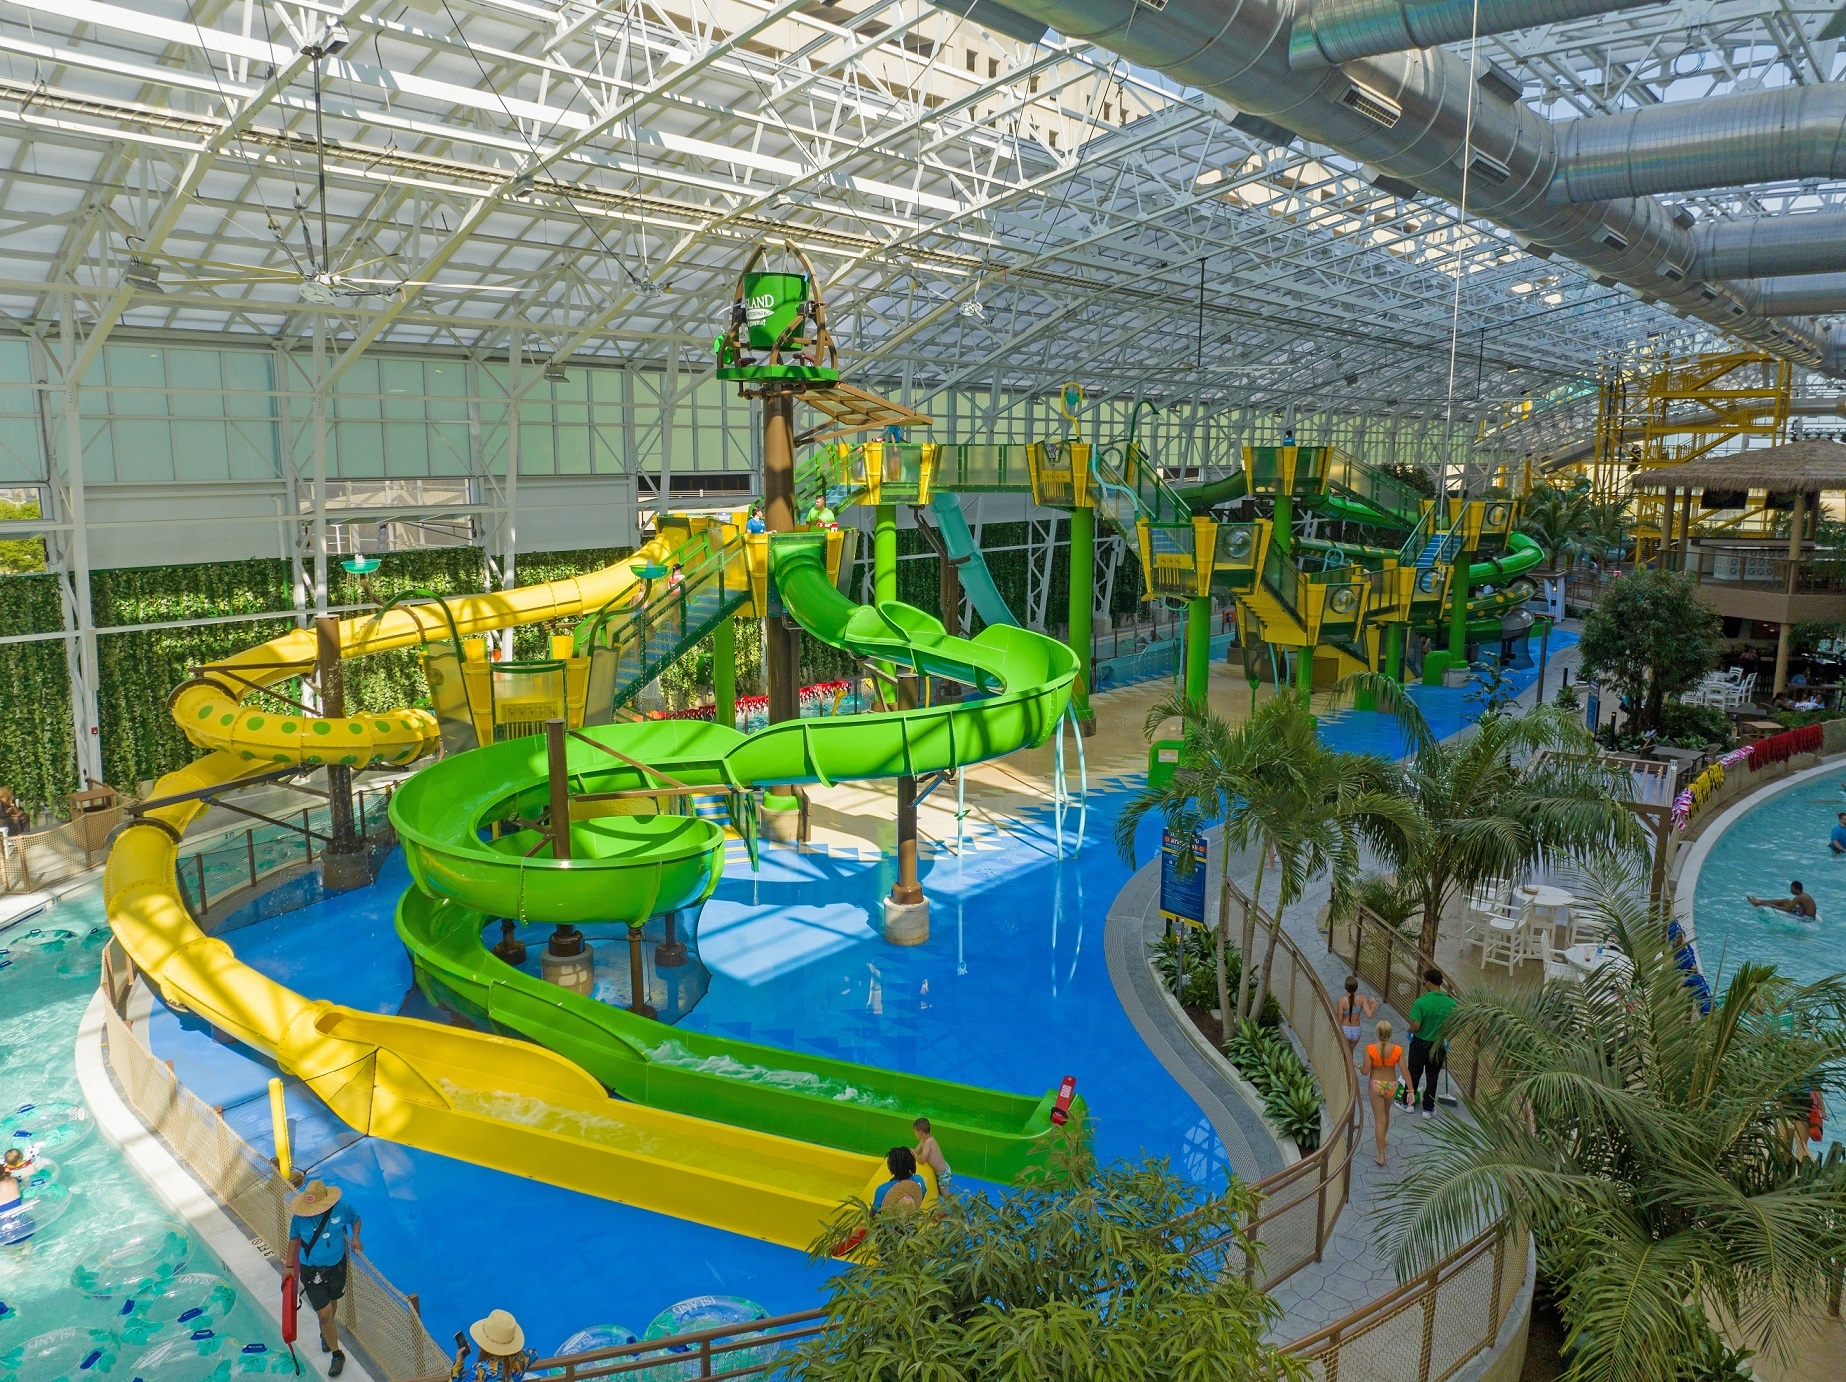 Green and yellow aquatic play structure